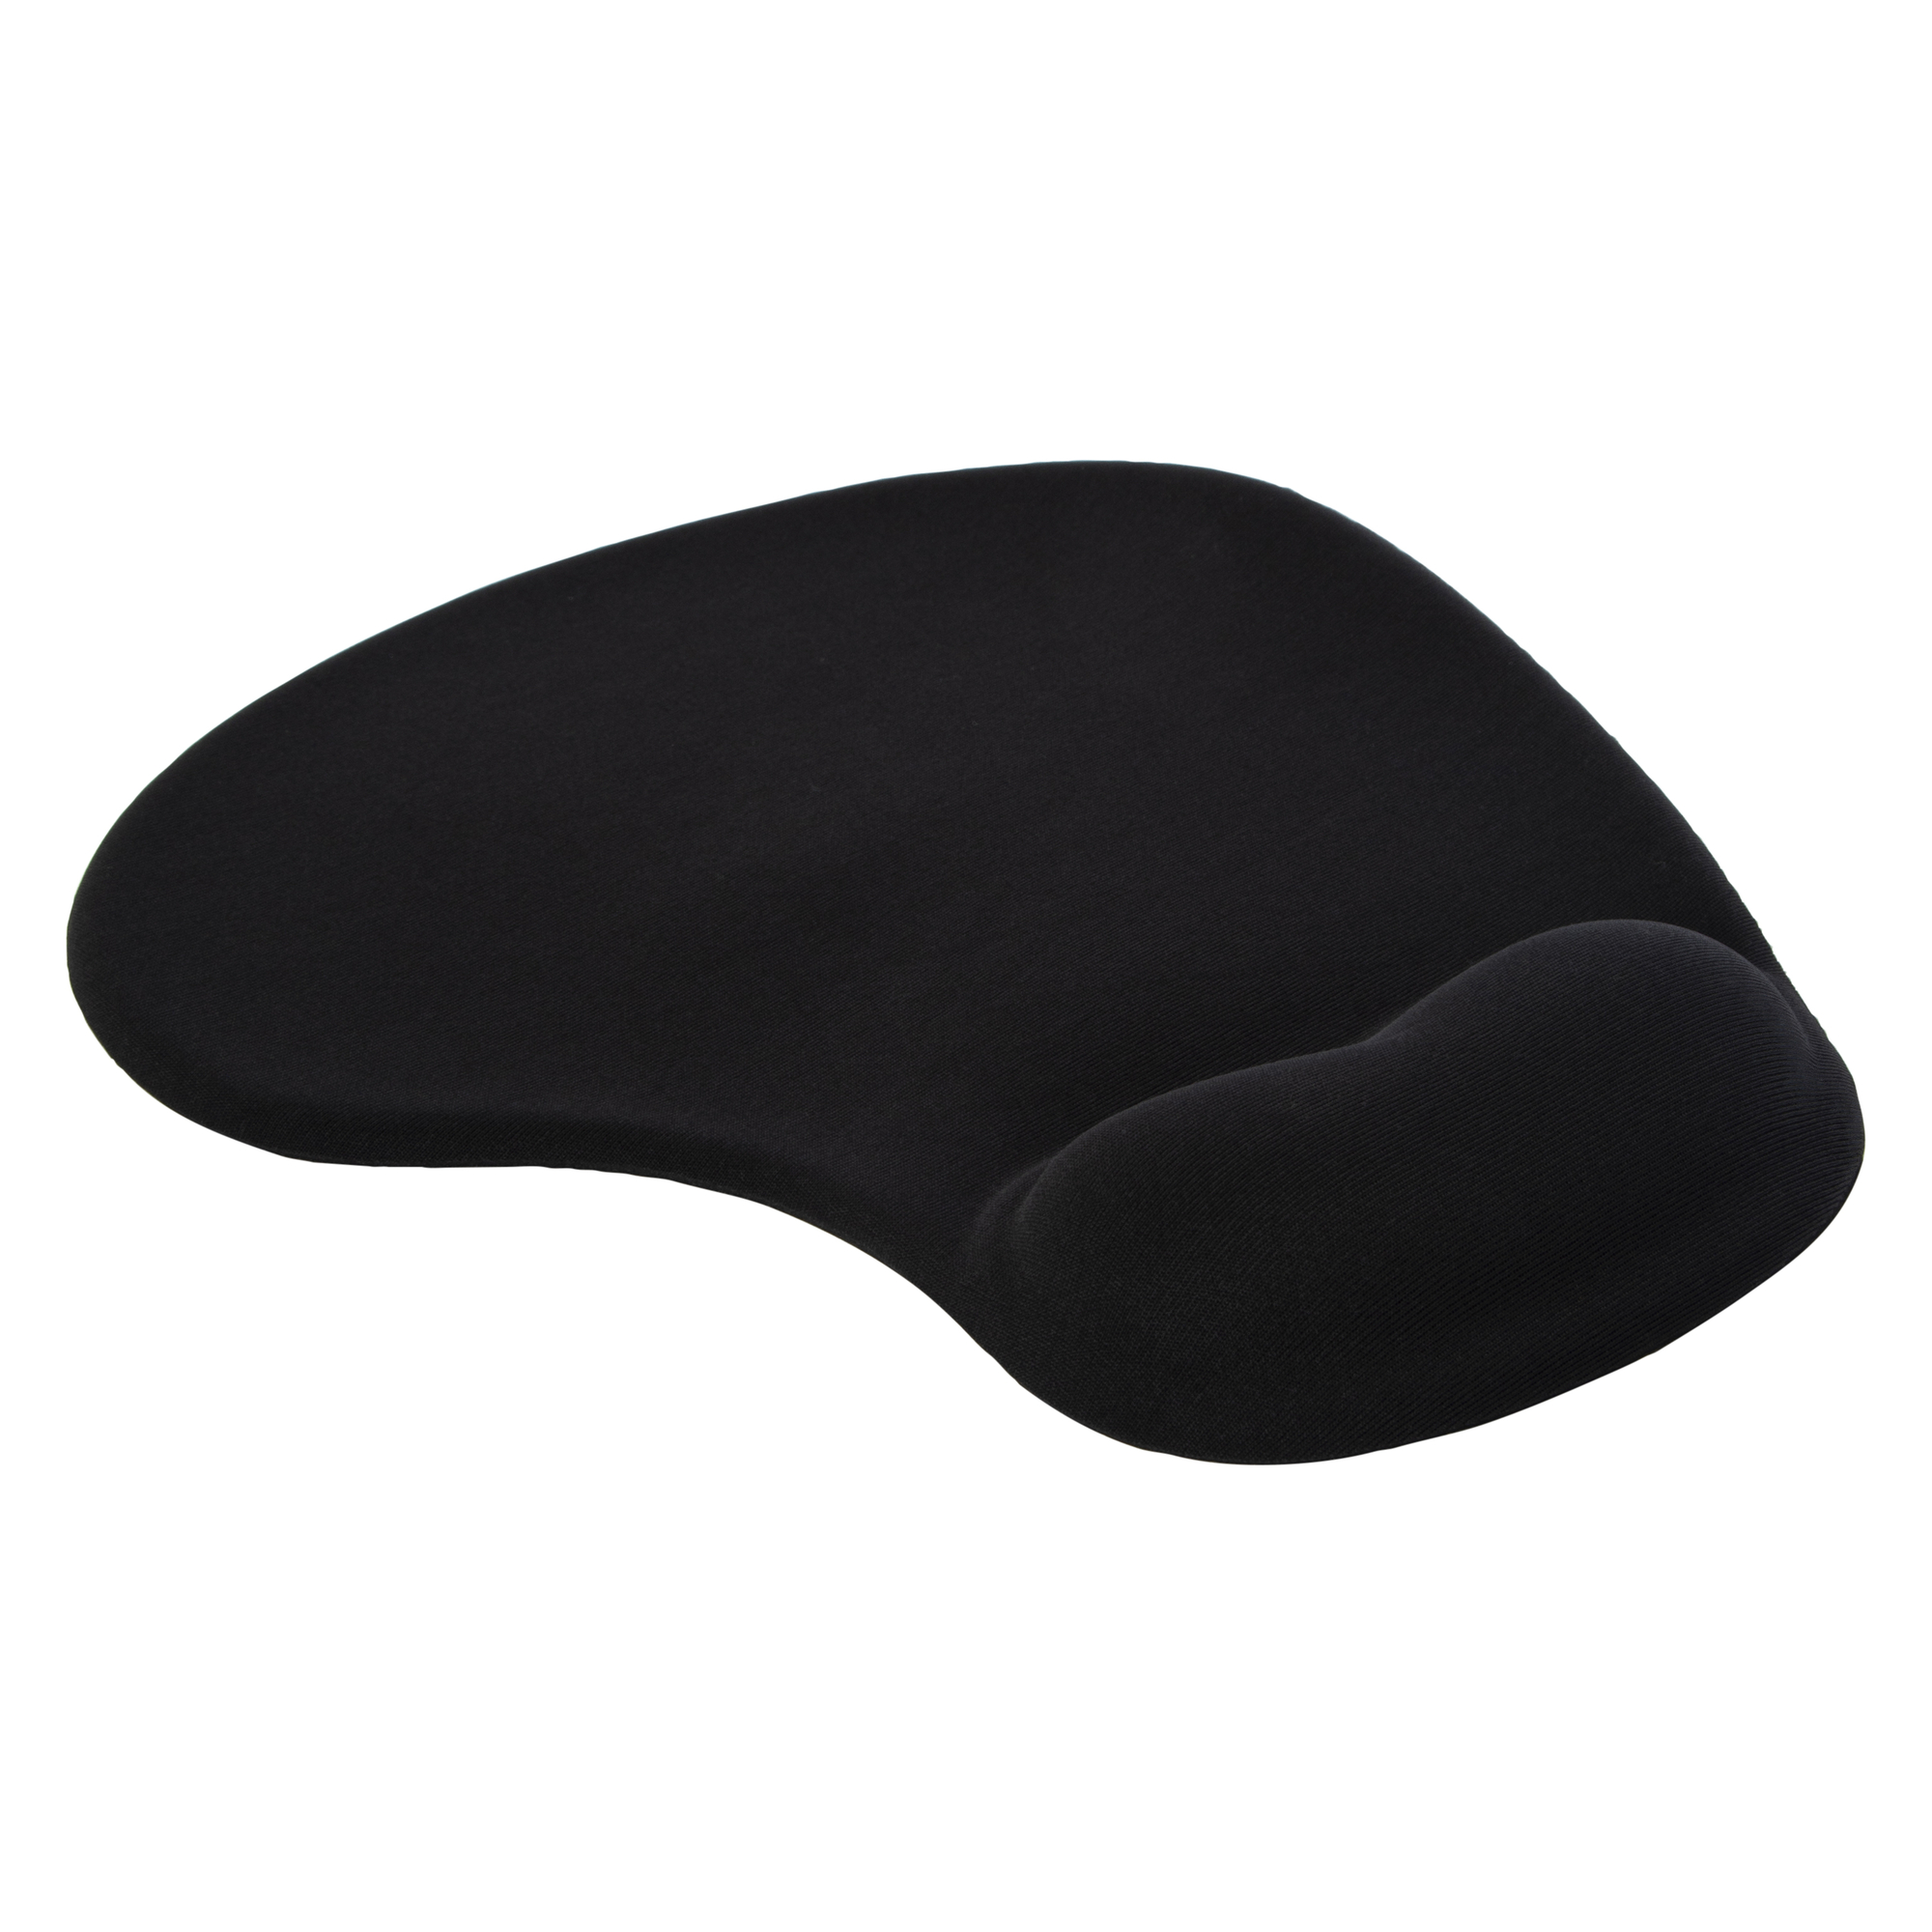 ergonomic mouse pad with gel wrist support